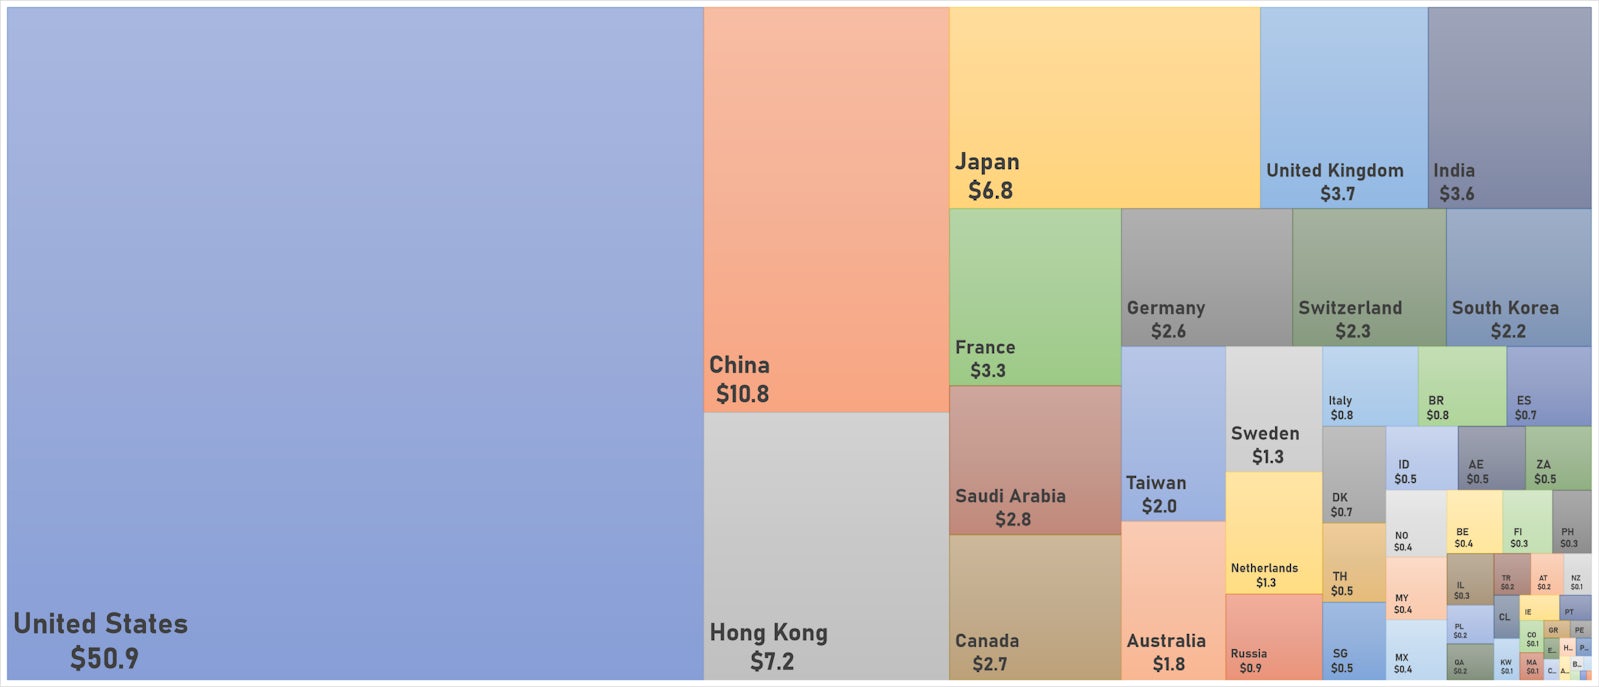 World Market Cap (in US$ Trillions), Broken Down By Country | Sources: ϕpost chart, FactSet data